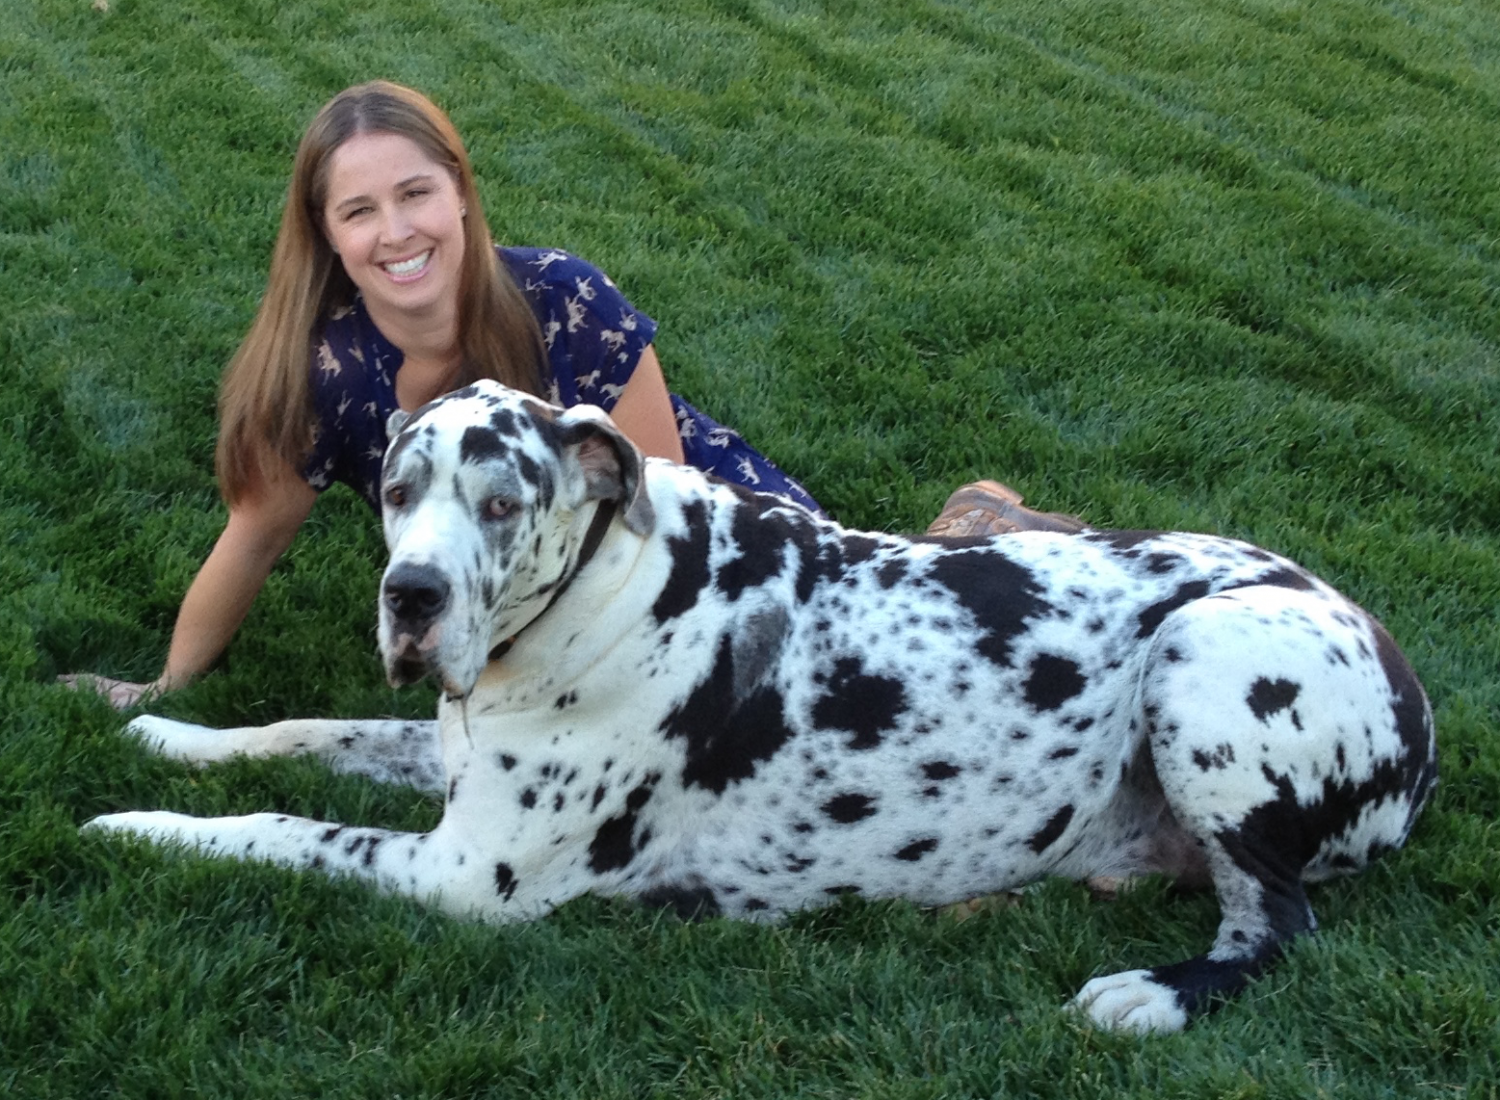 Heather with a Great Dane